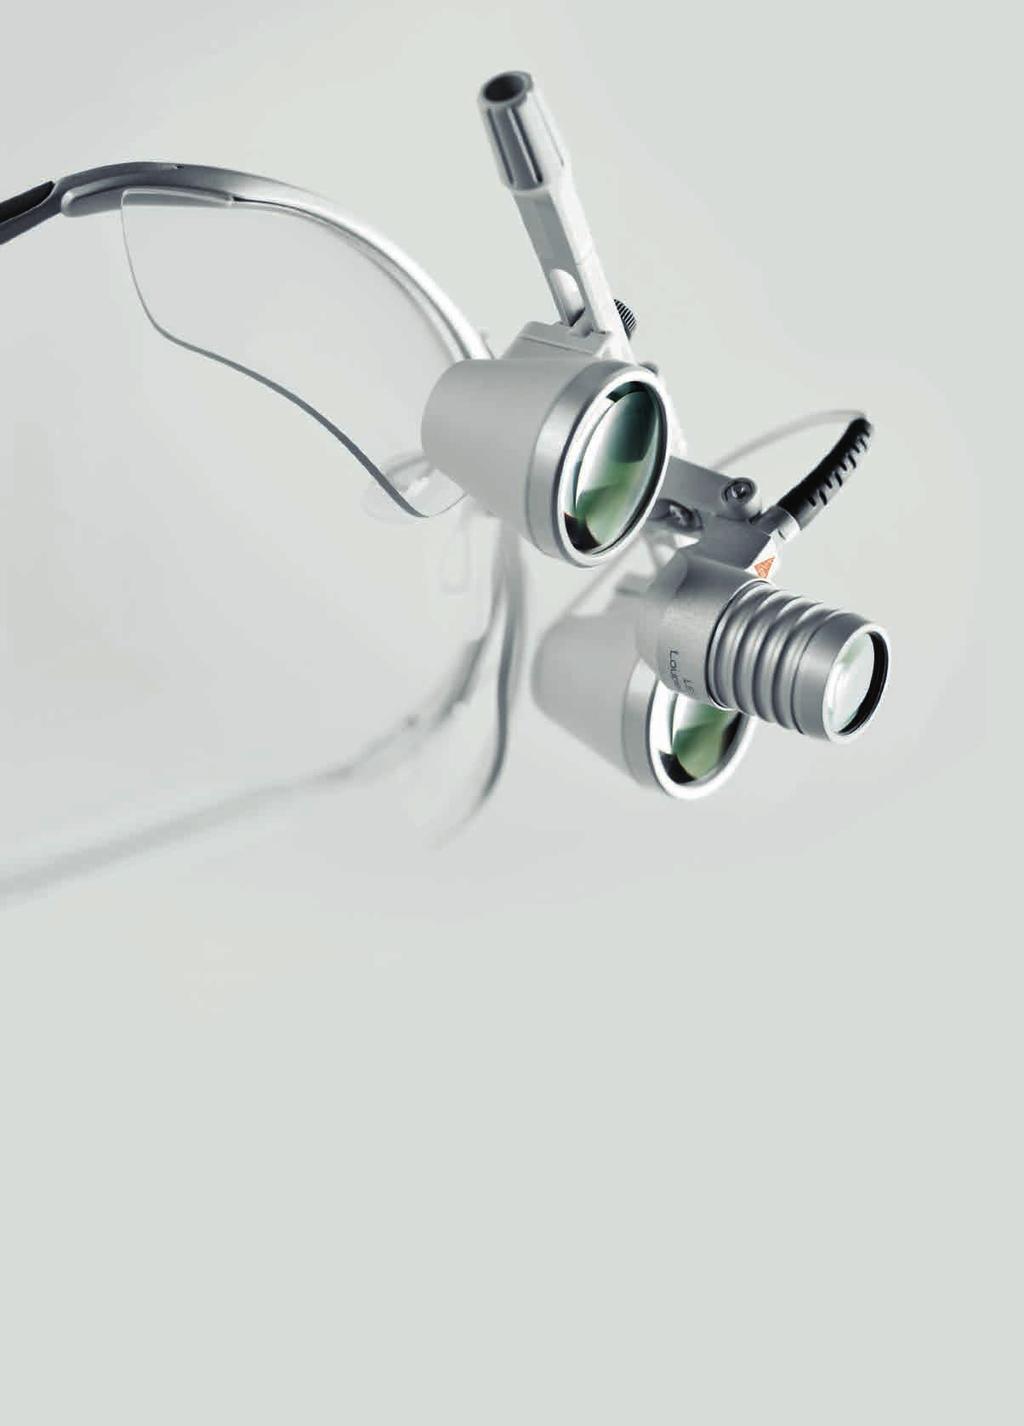 How to choose the correct Loupe: Choose your magnification Choose the lowest magnification that meets your needs.